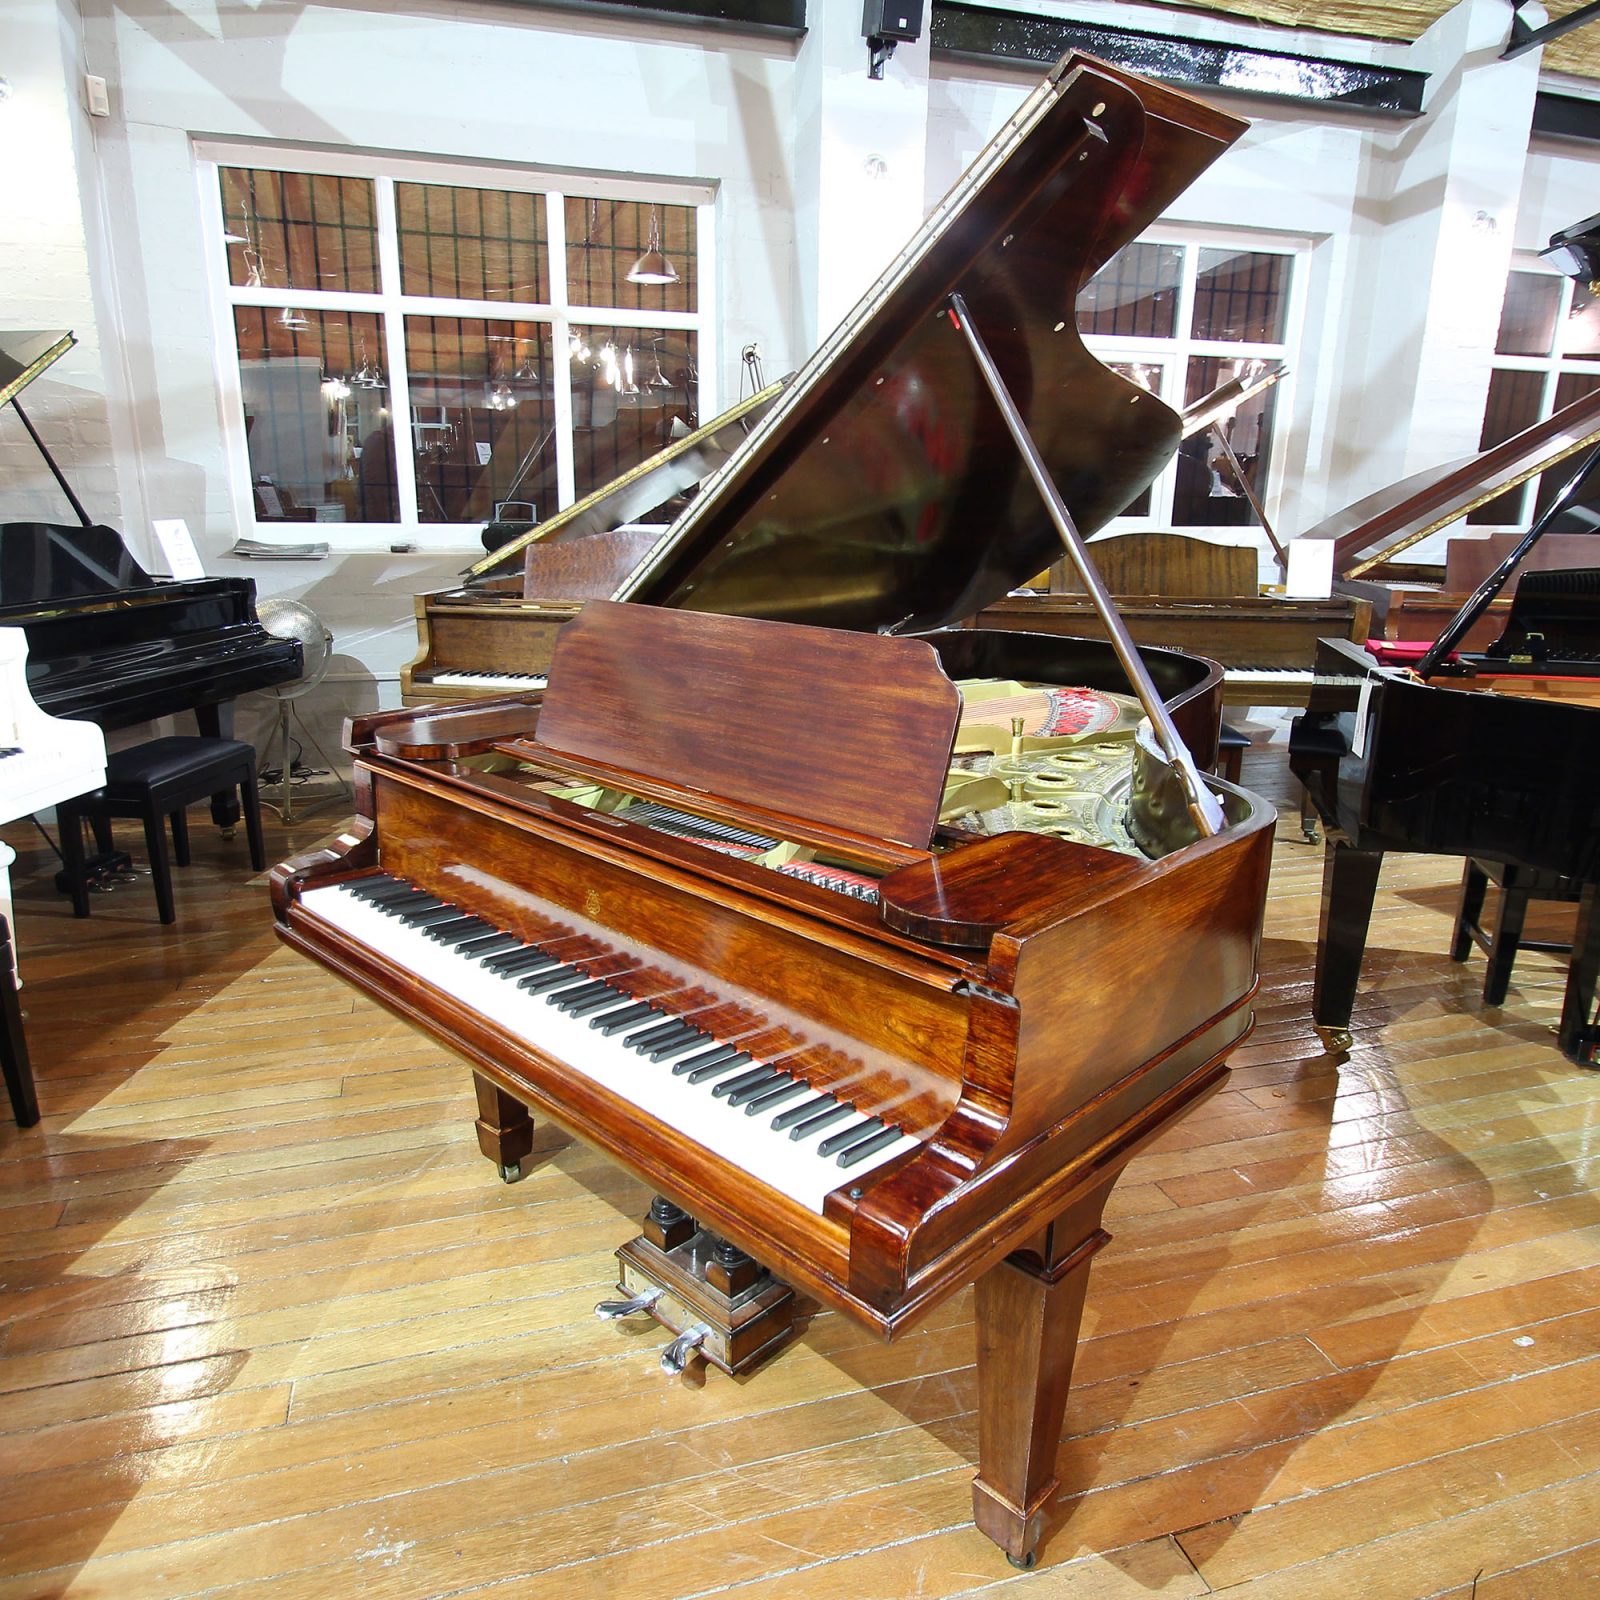 Steinway Model B boudoir grand piano, in a rosewood case, for sale.